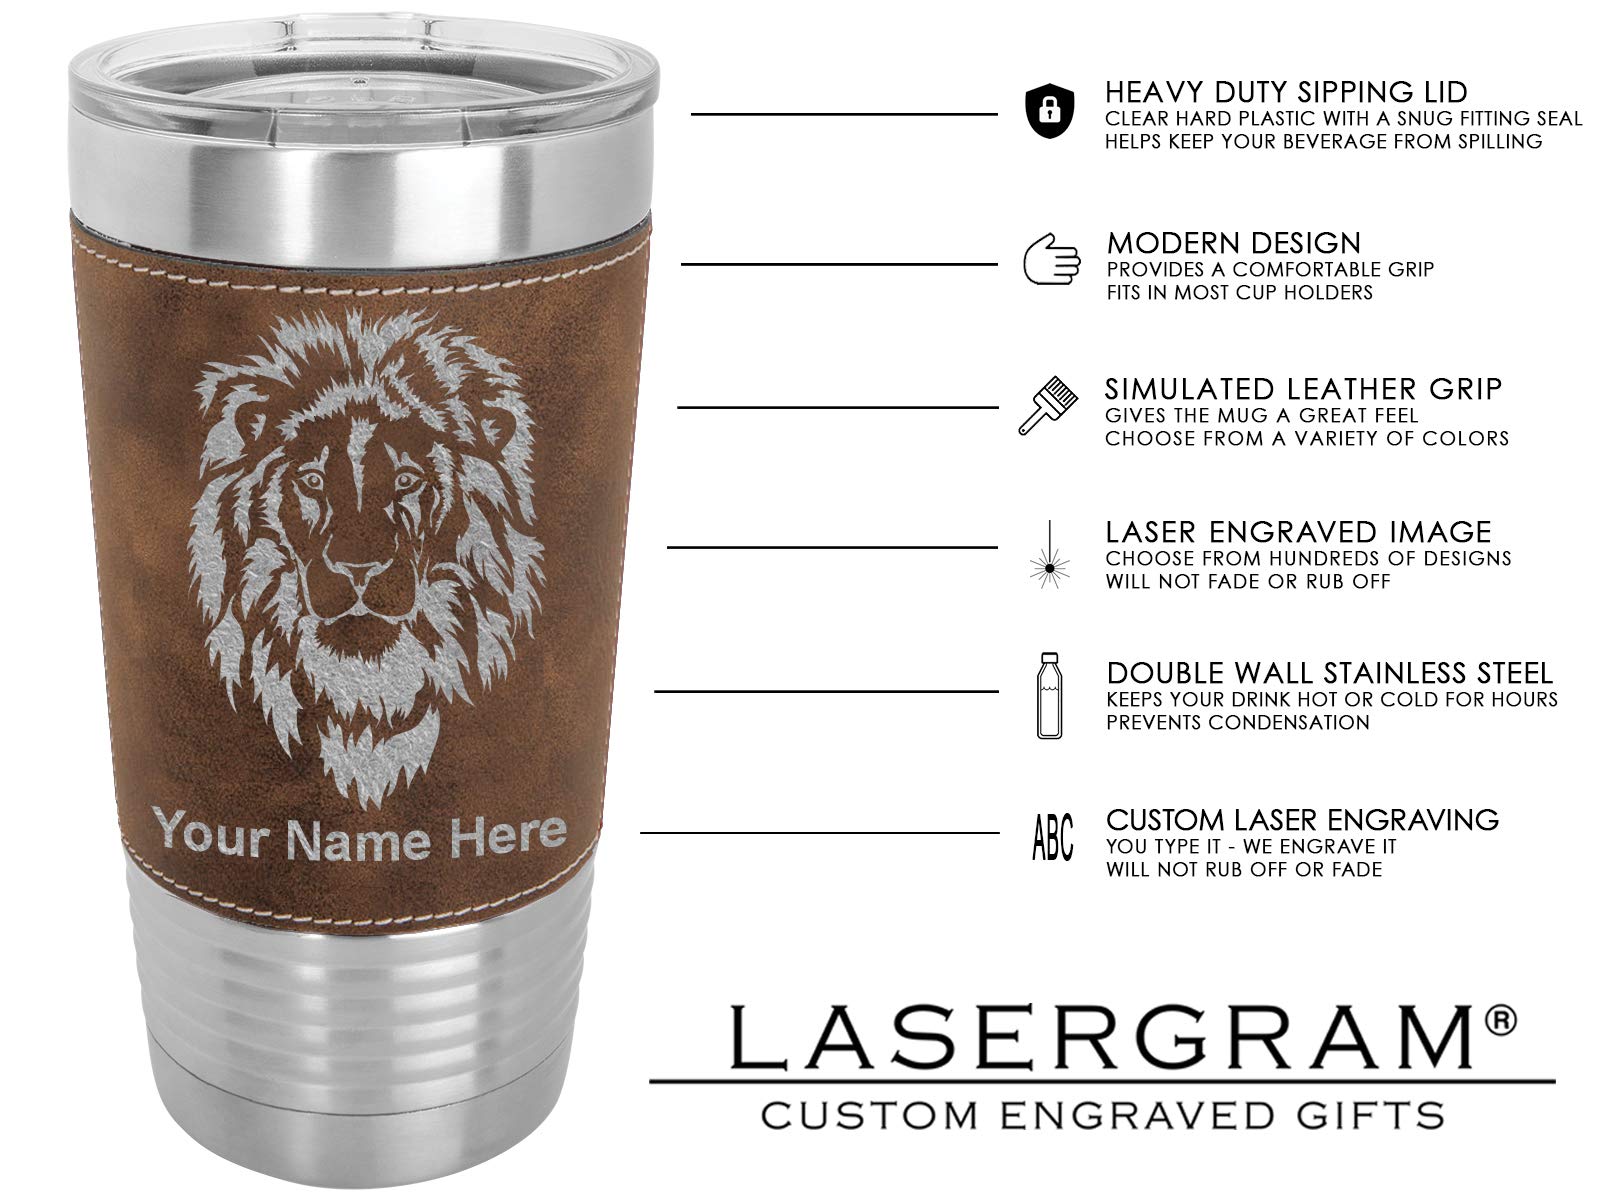 LaserGram 20oz Vacuum Insulated Tumbler Mug, Barrel Racer, Personalized Engraving Included (Faux Leather, Rustic)